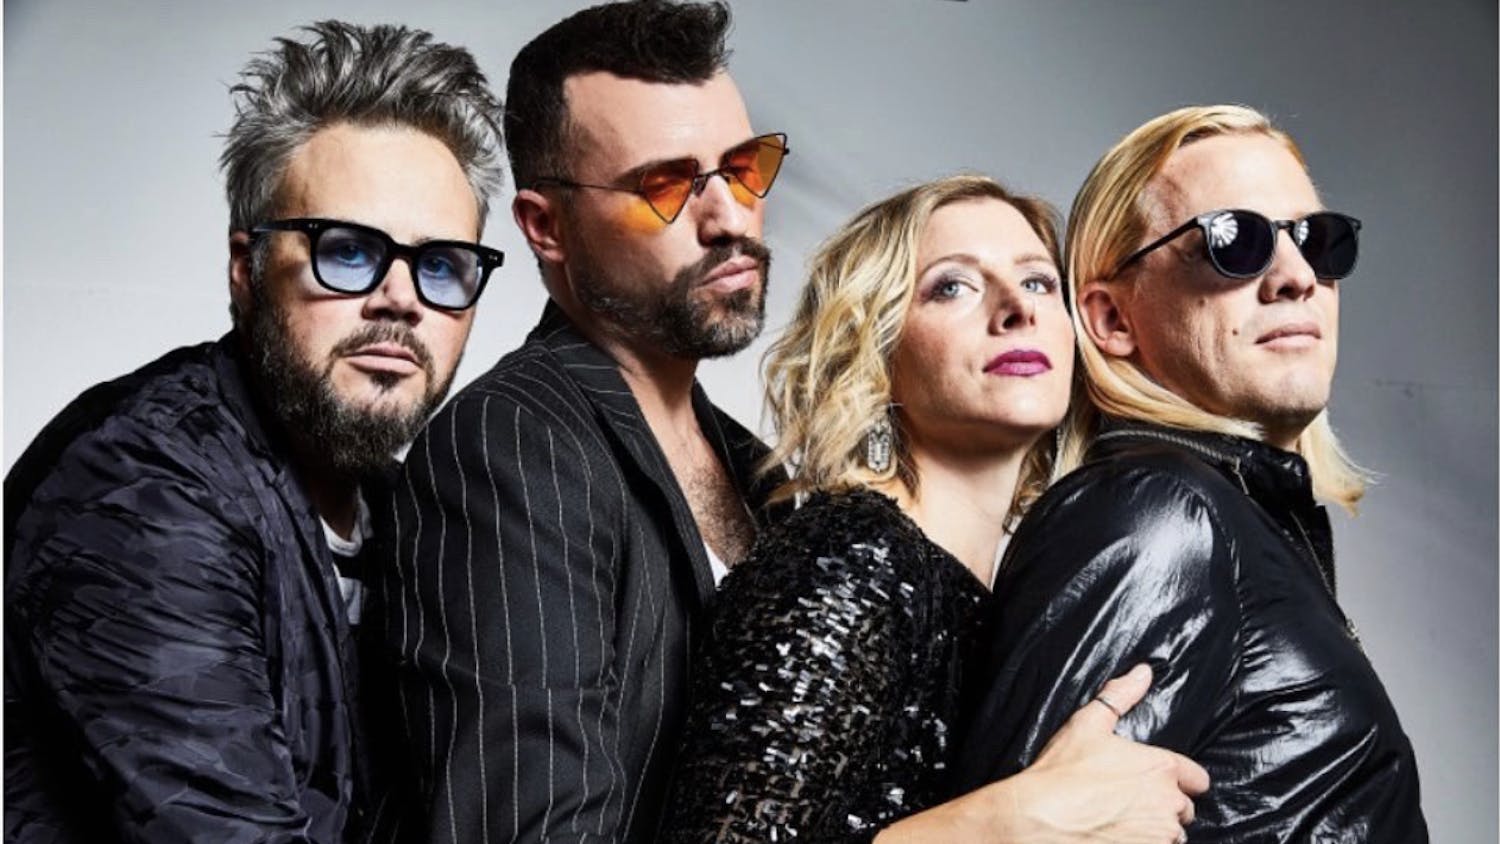 Underrated Artist: Neon Trees thrives on inclusivity and eccentricism